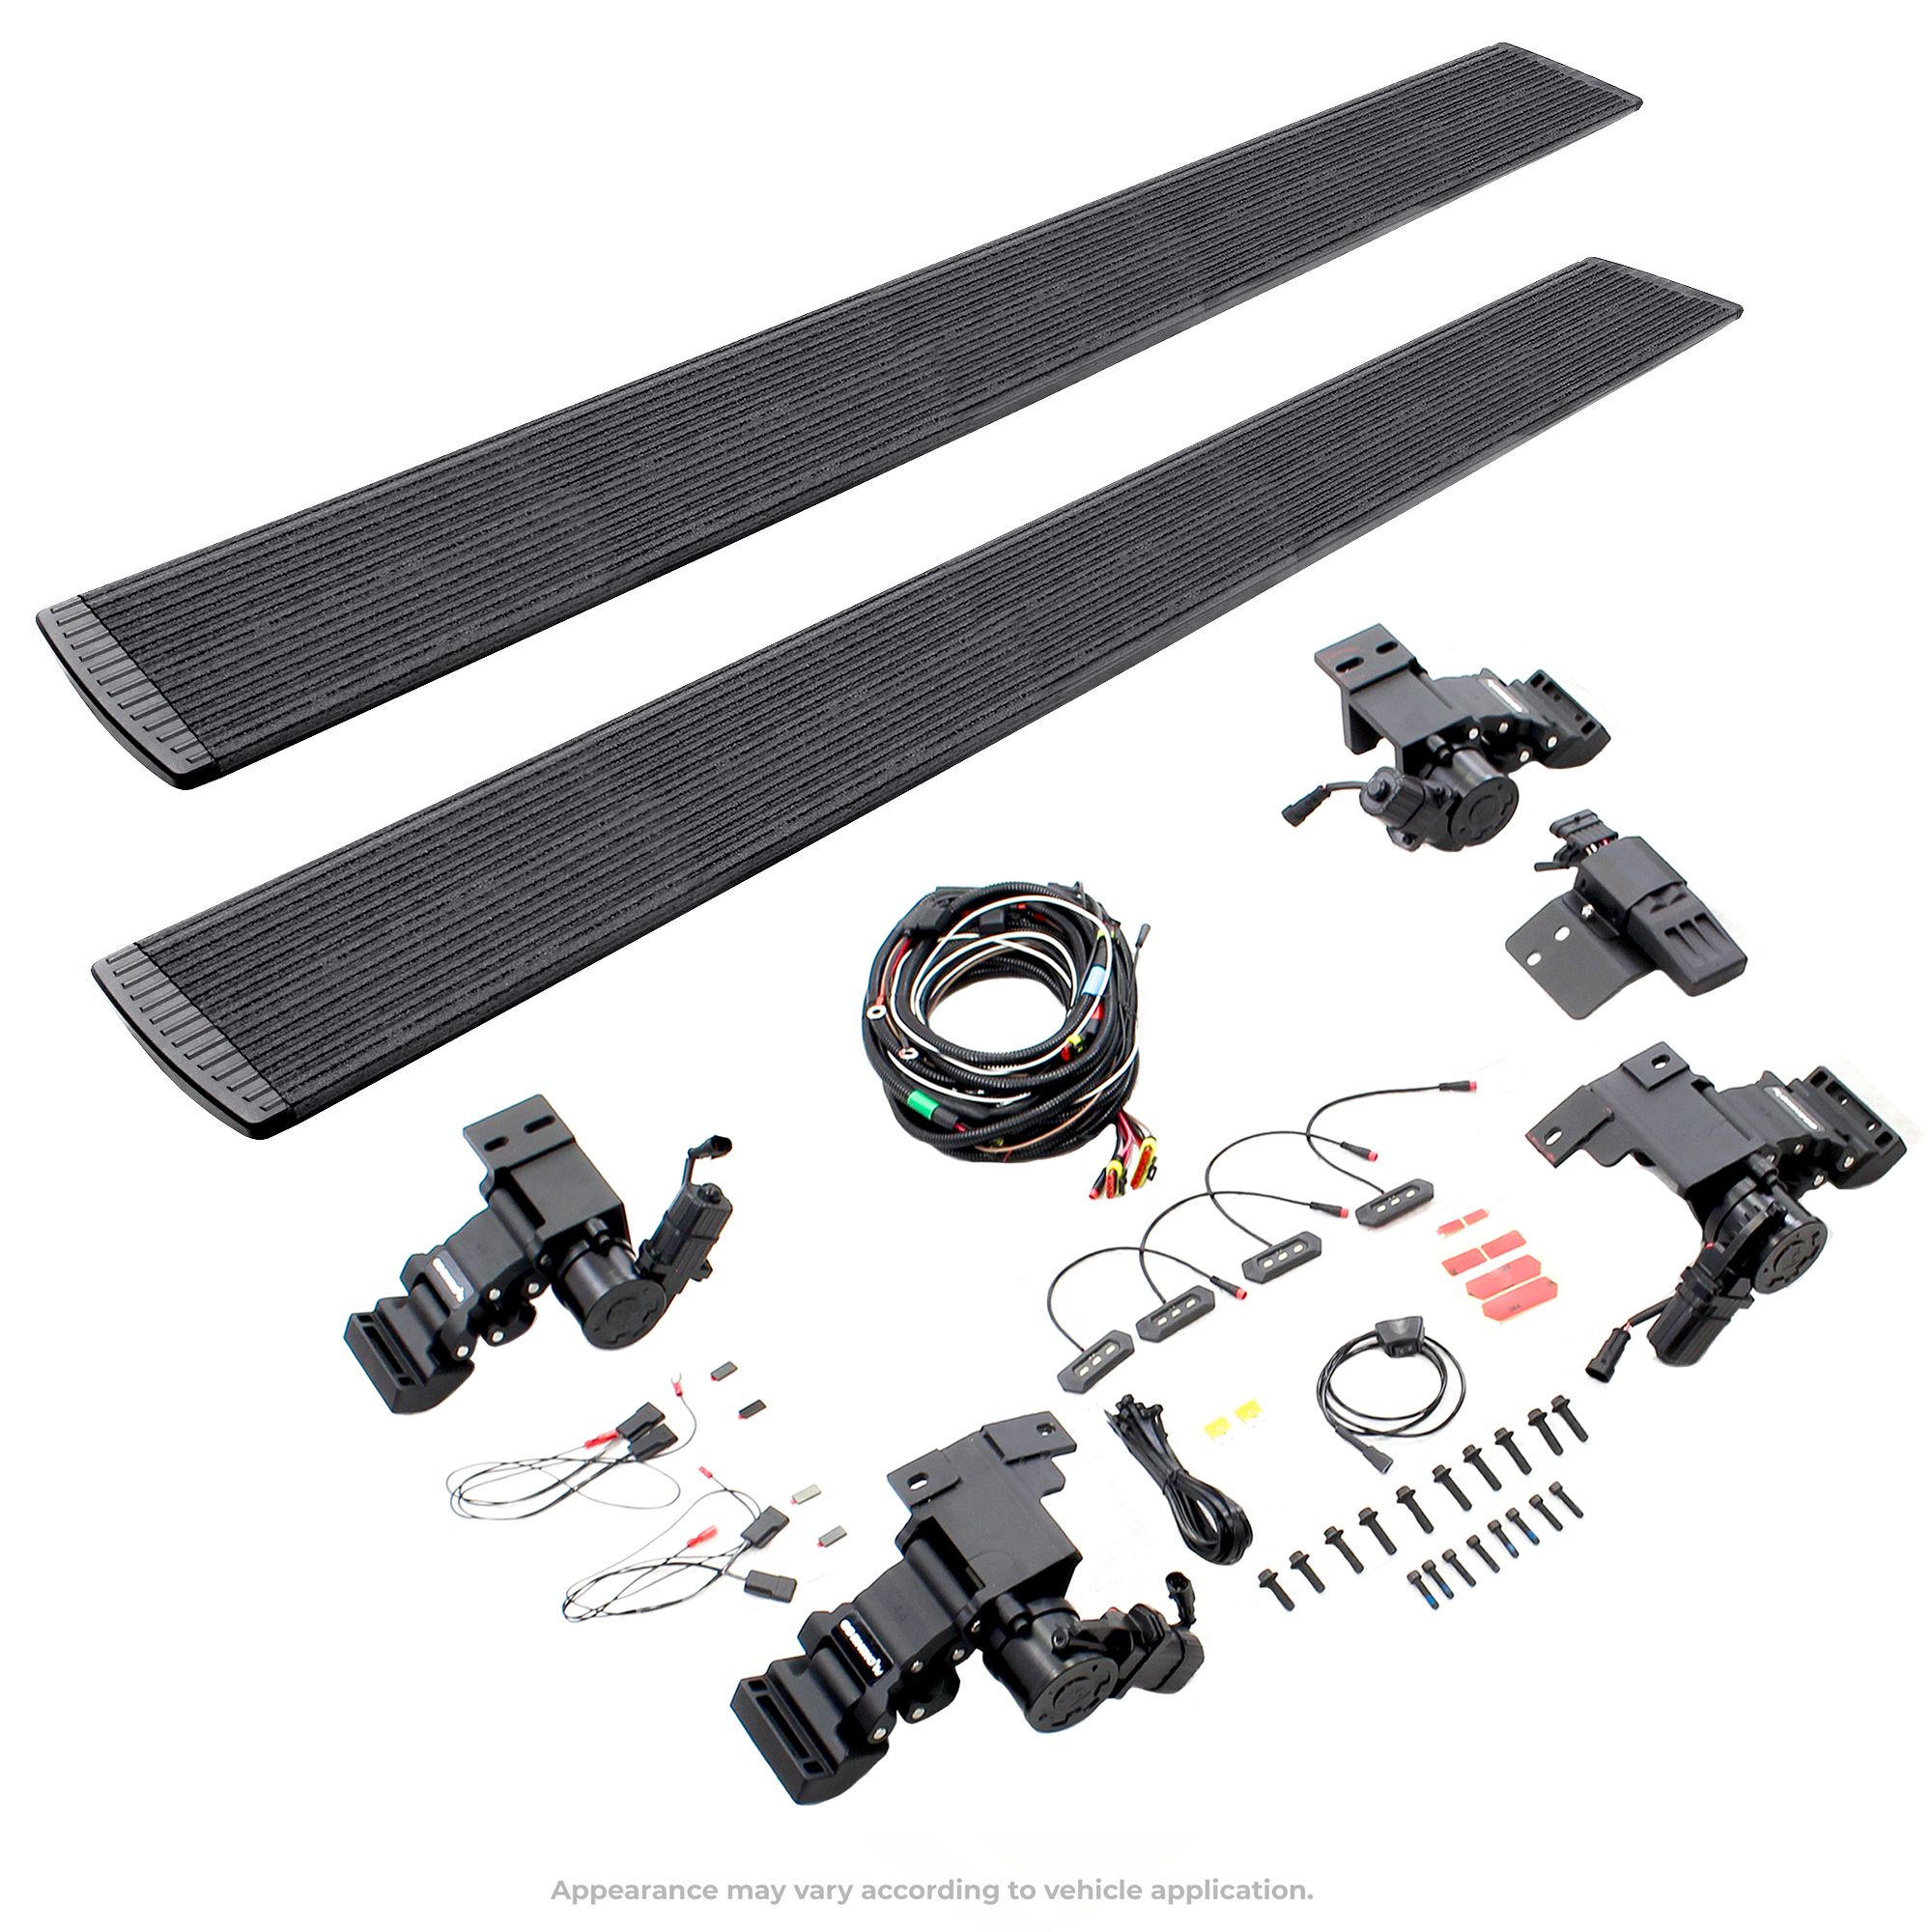 Go Rhino 20415580T - E1 Electric Running Boards With Mounting Brackets - Protective Bedliner Coating